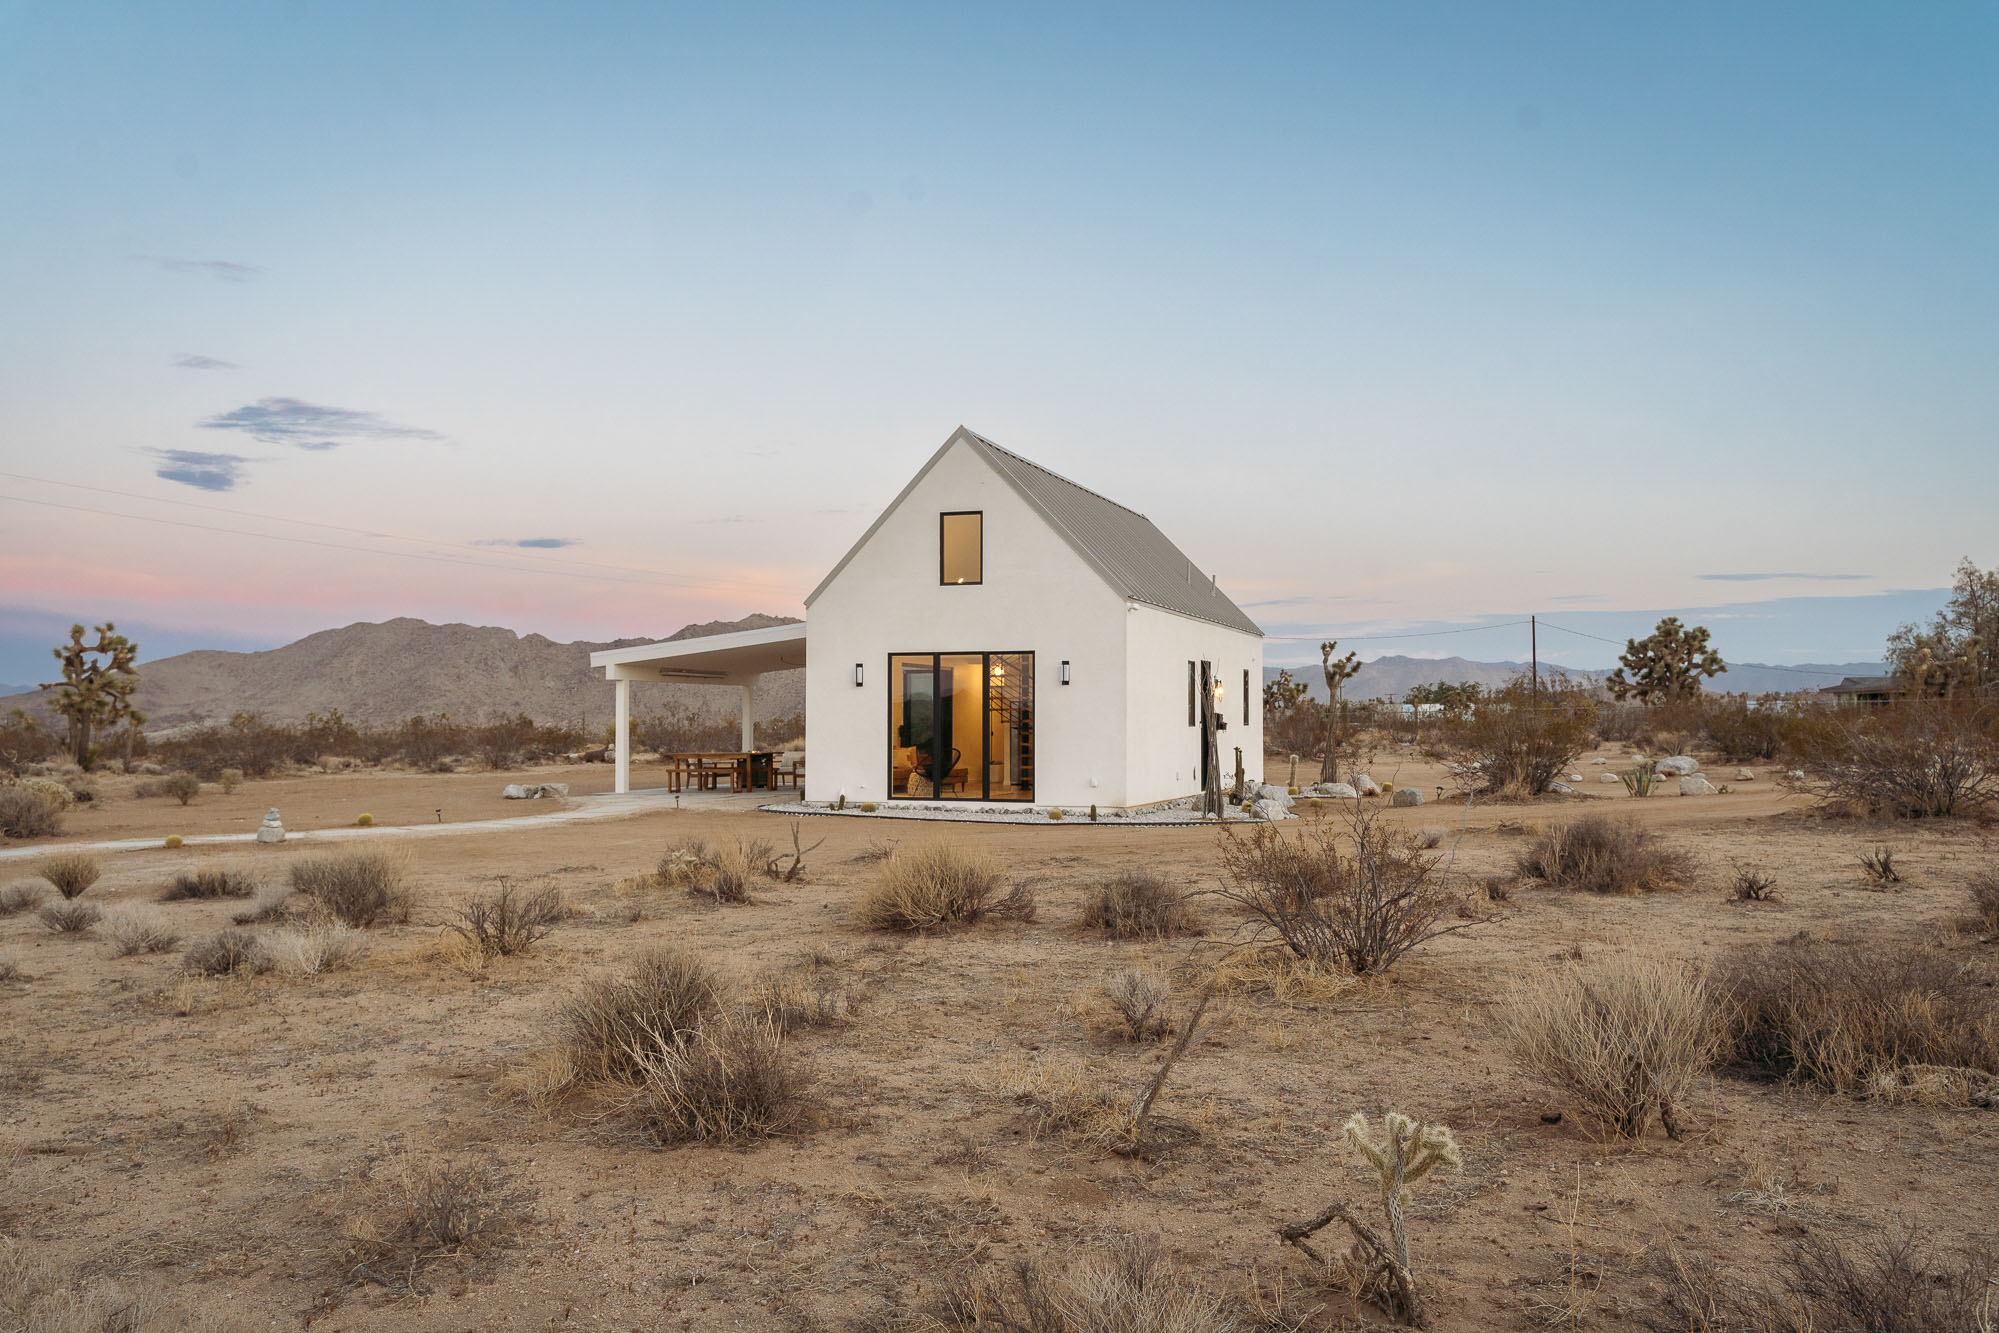 White house with an overhang porch in a desert landscape.